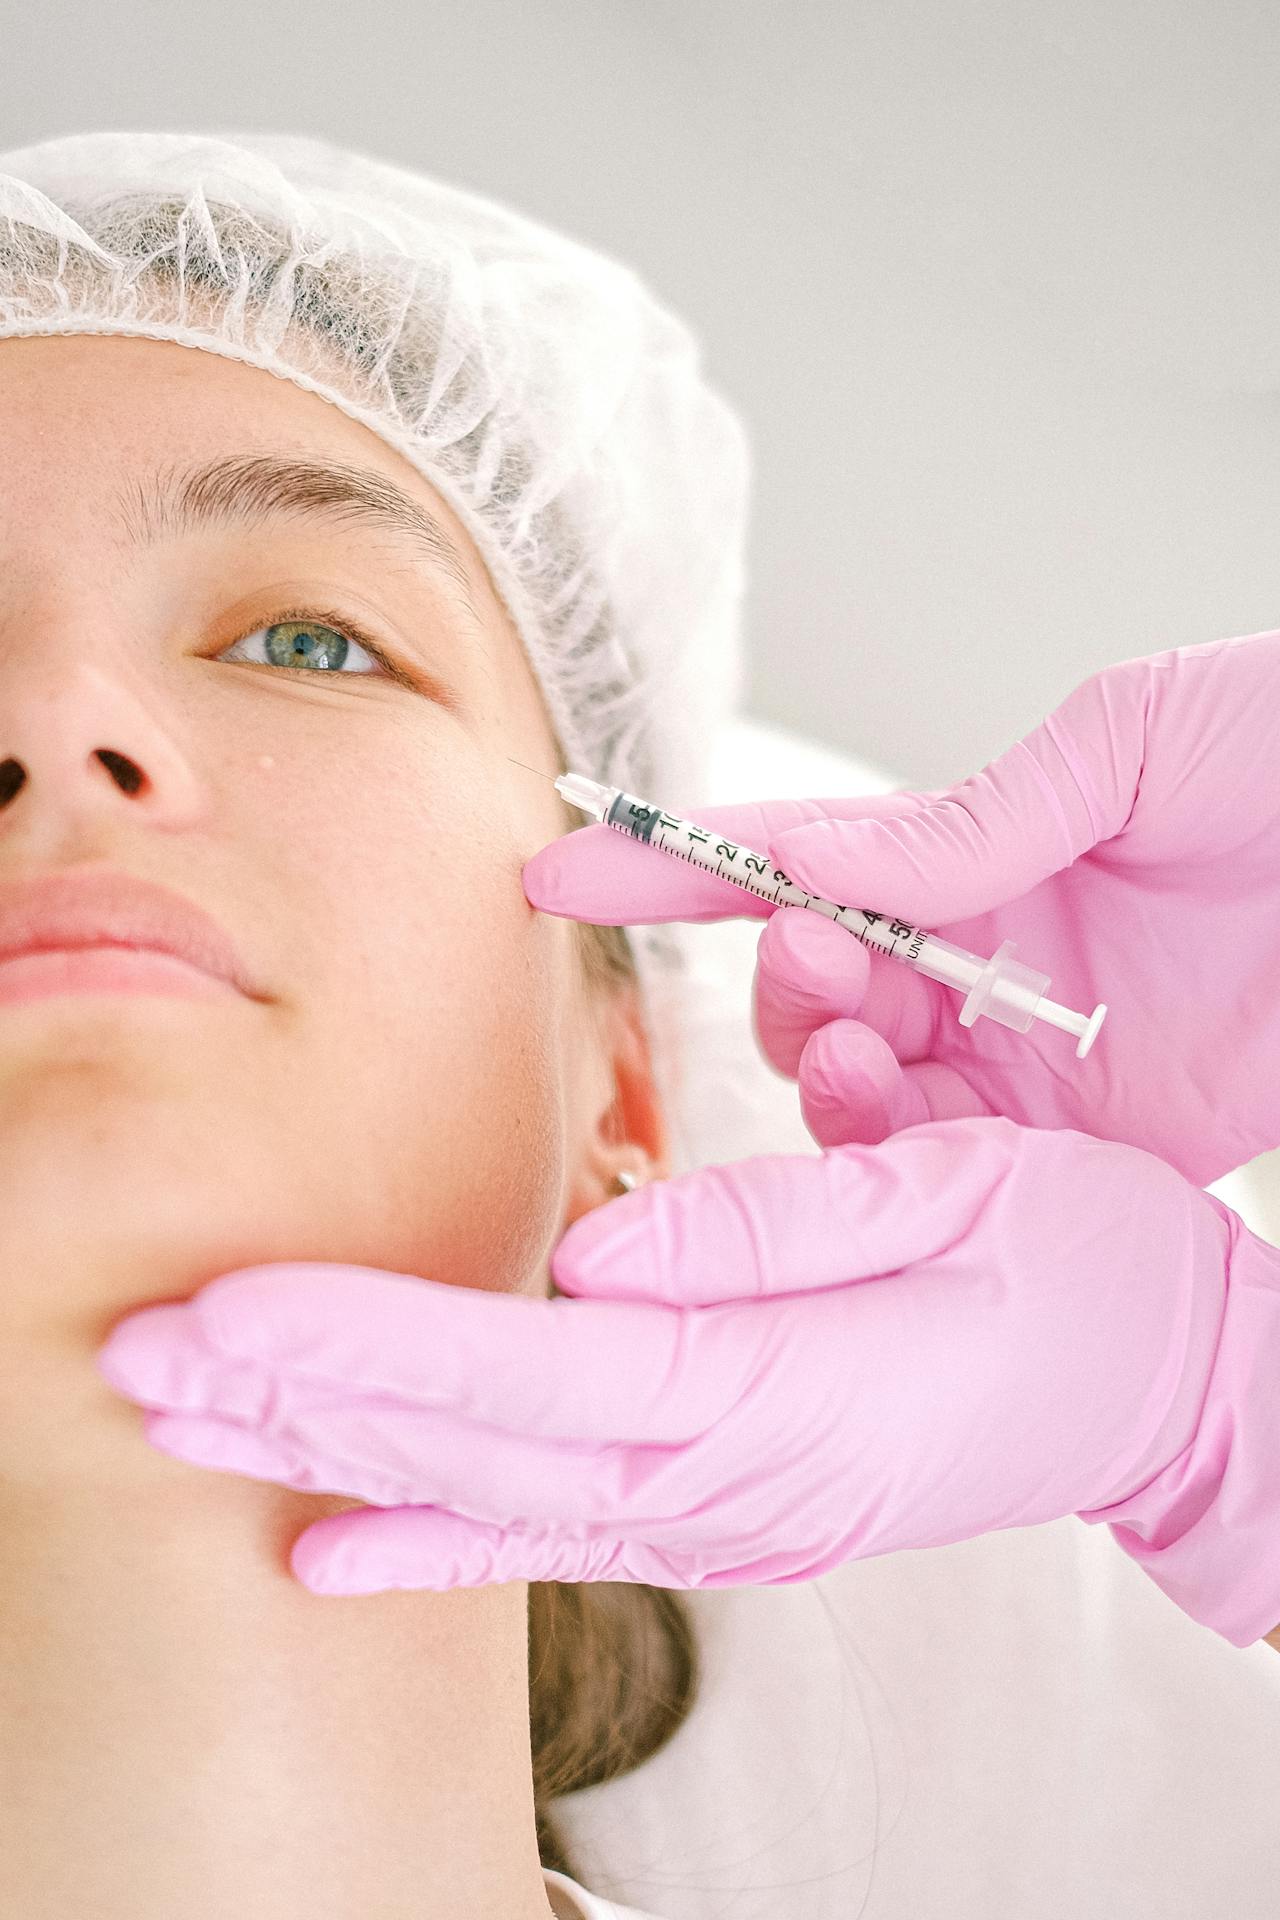 Woman receiving filler treatment for facial contouring and hydration